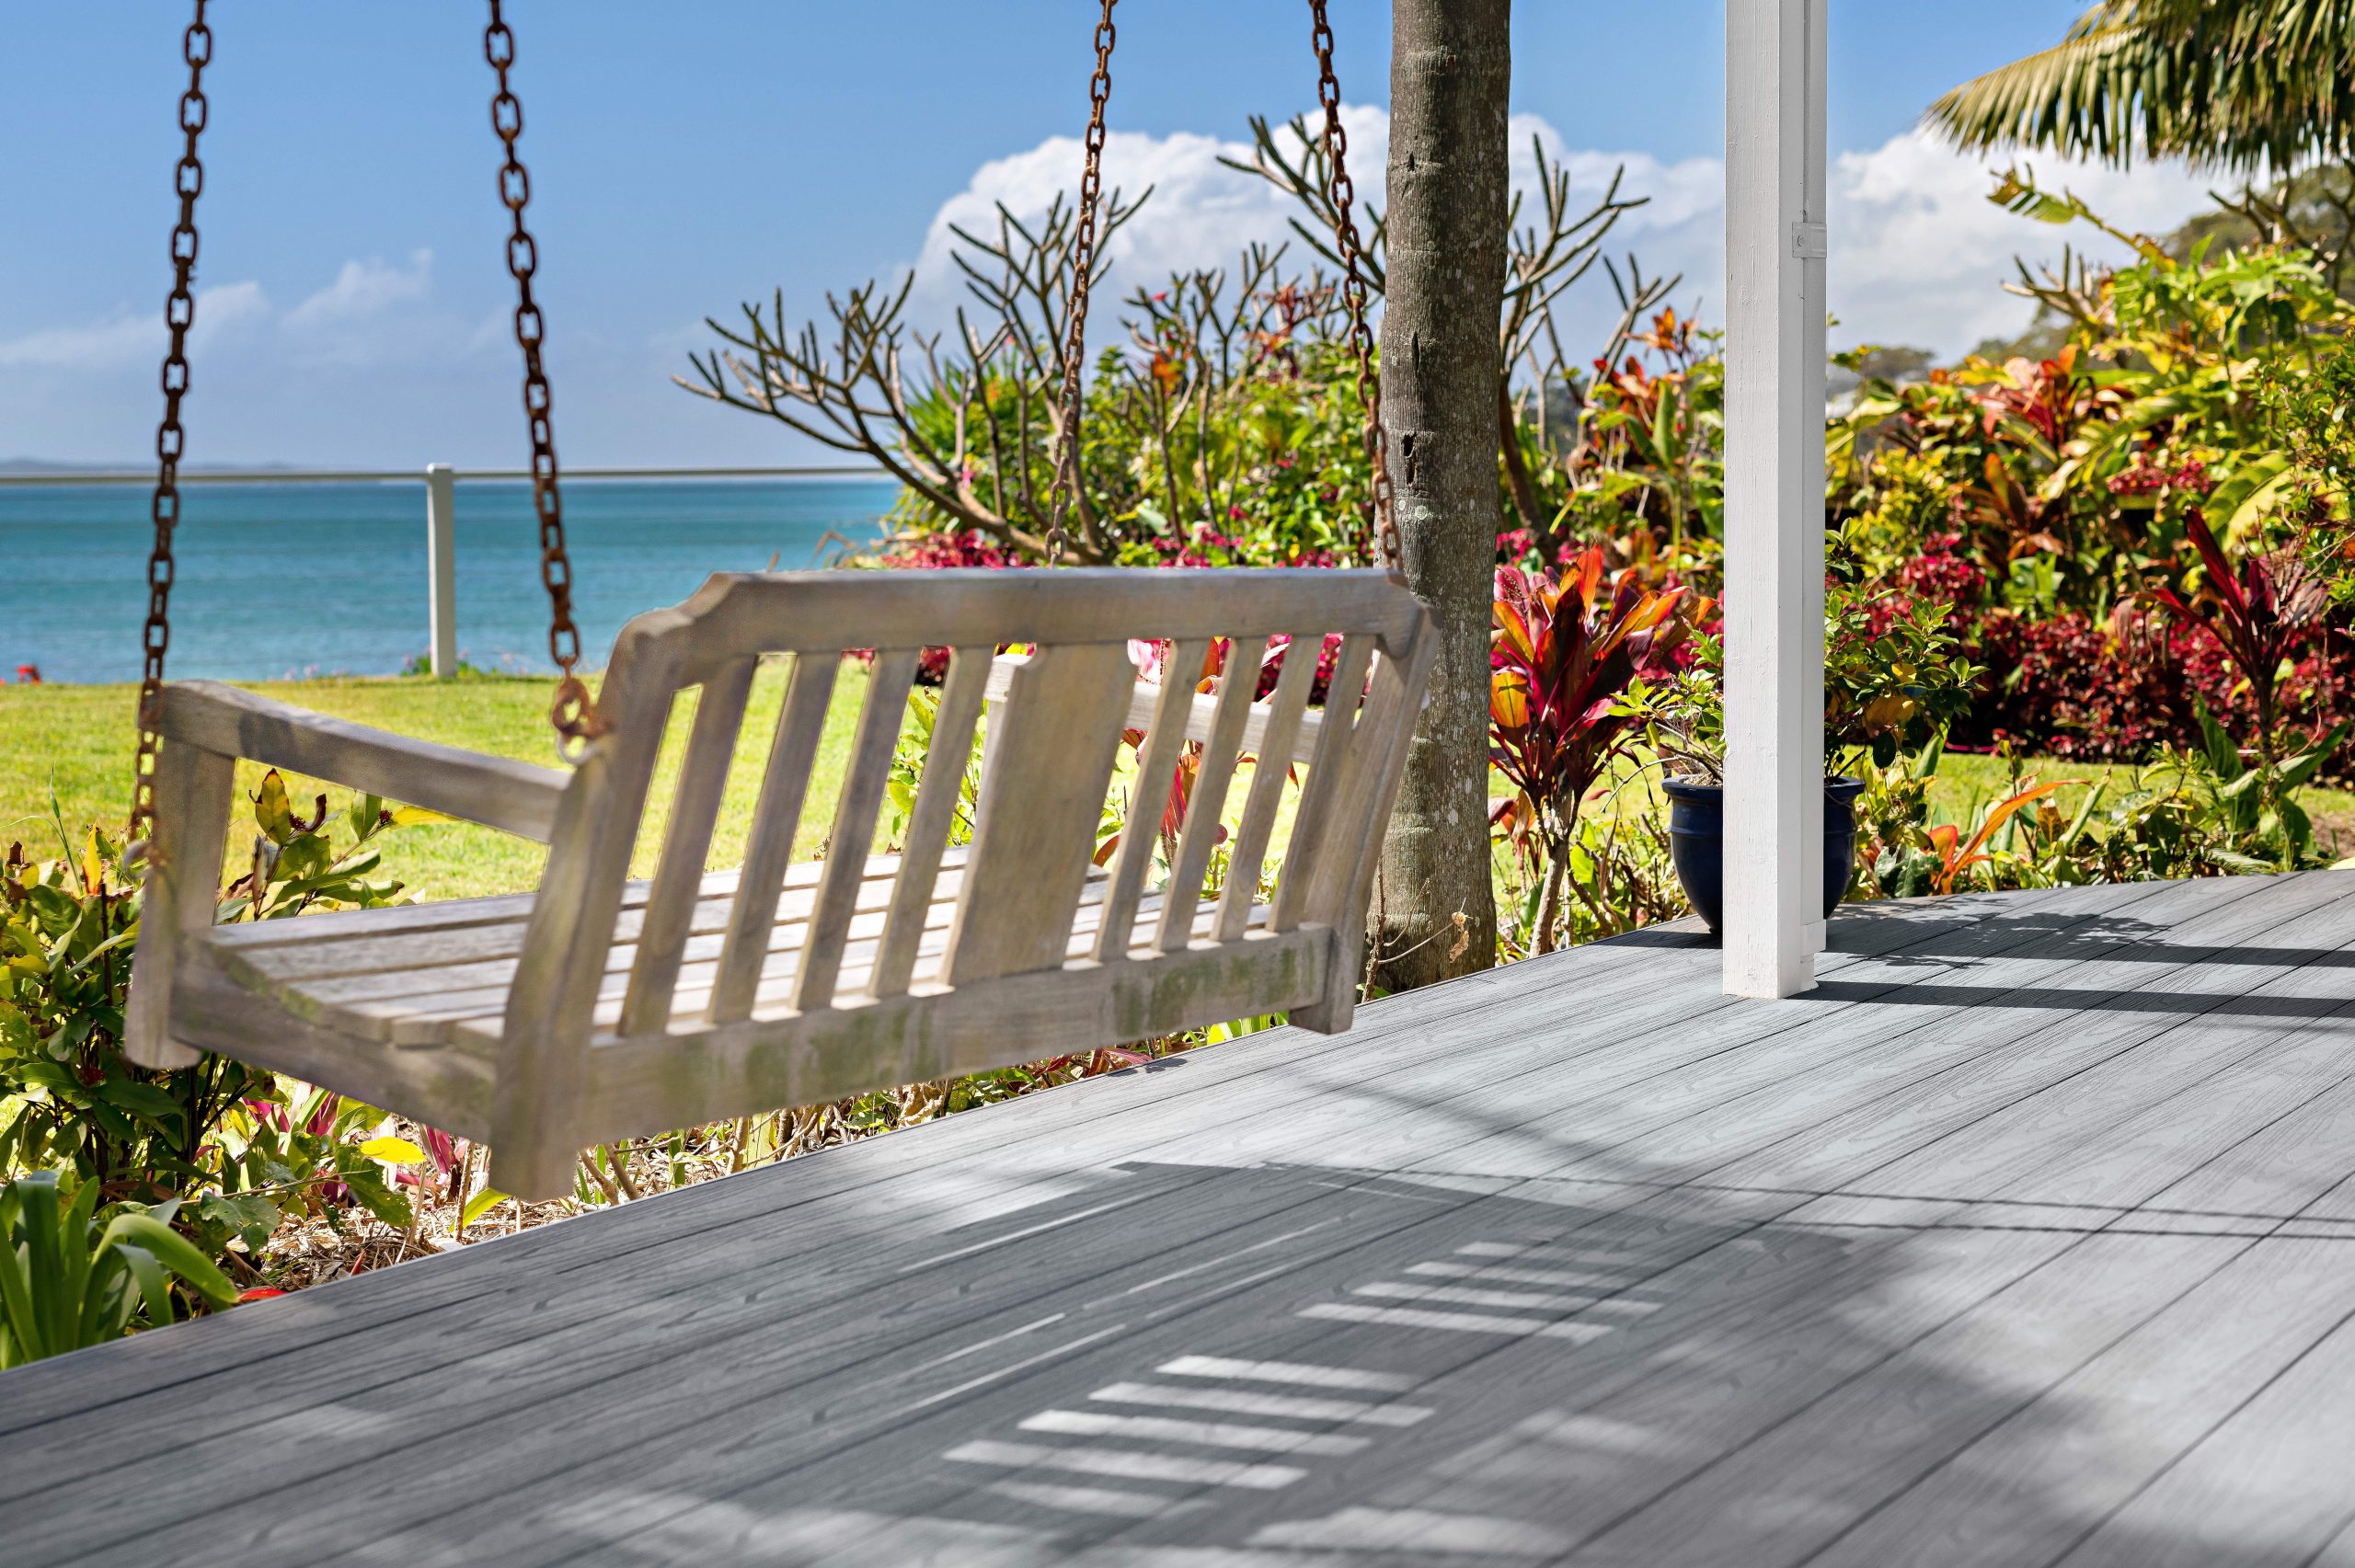 A two person, wooden patio swing overlooking the ocean